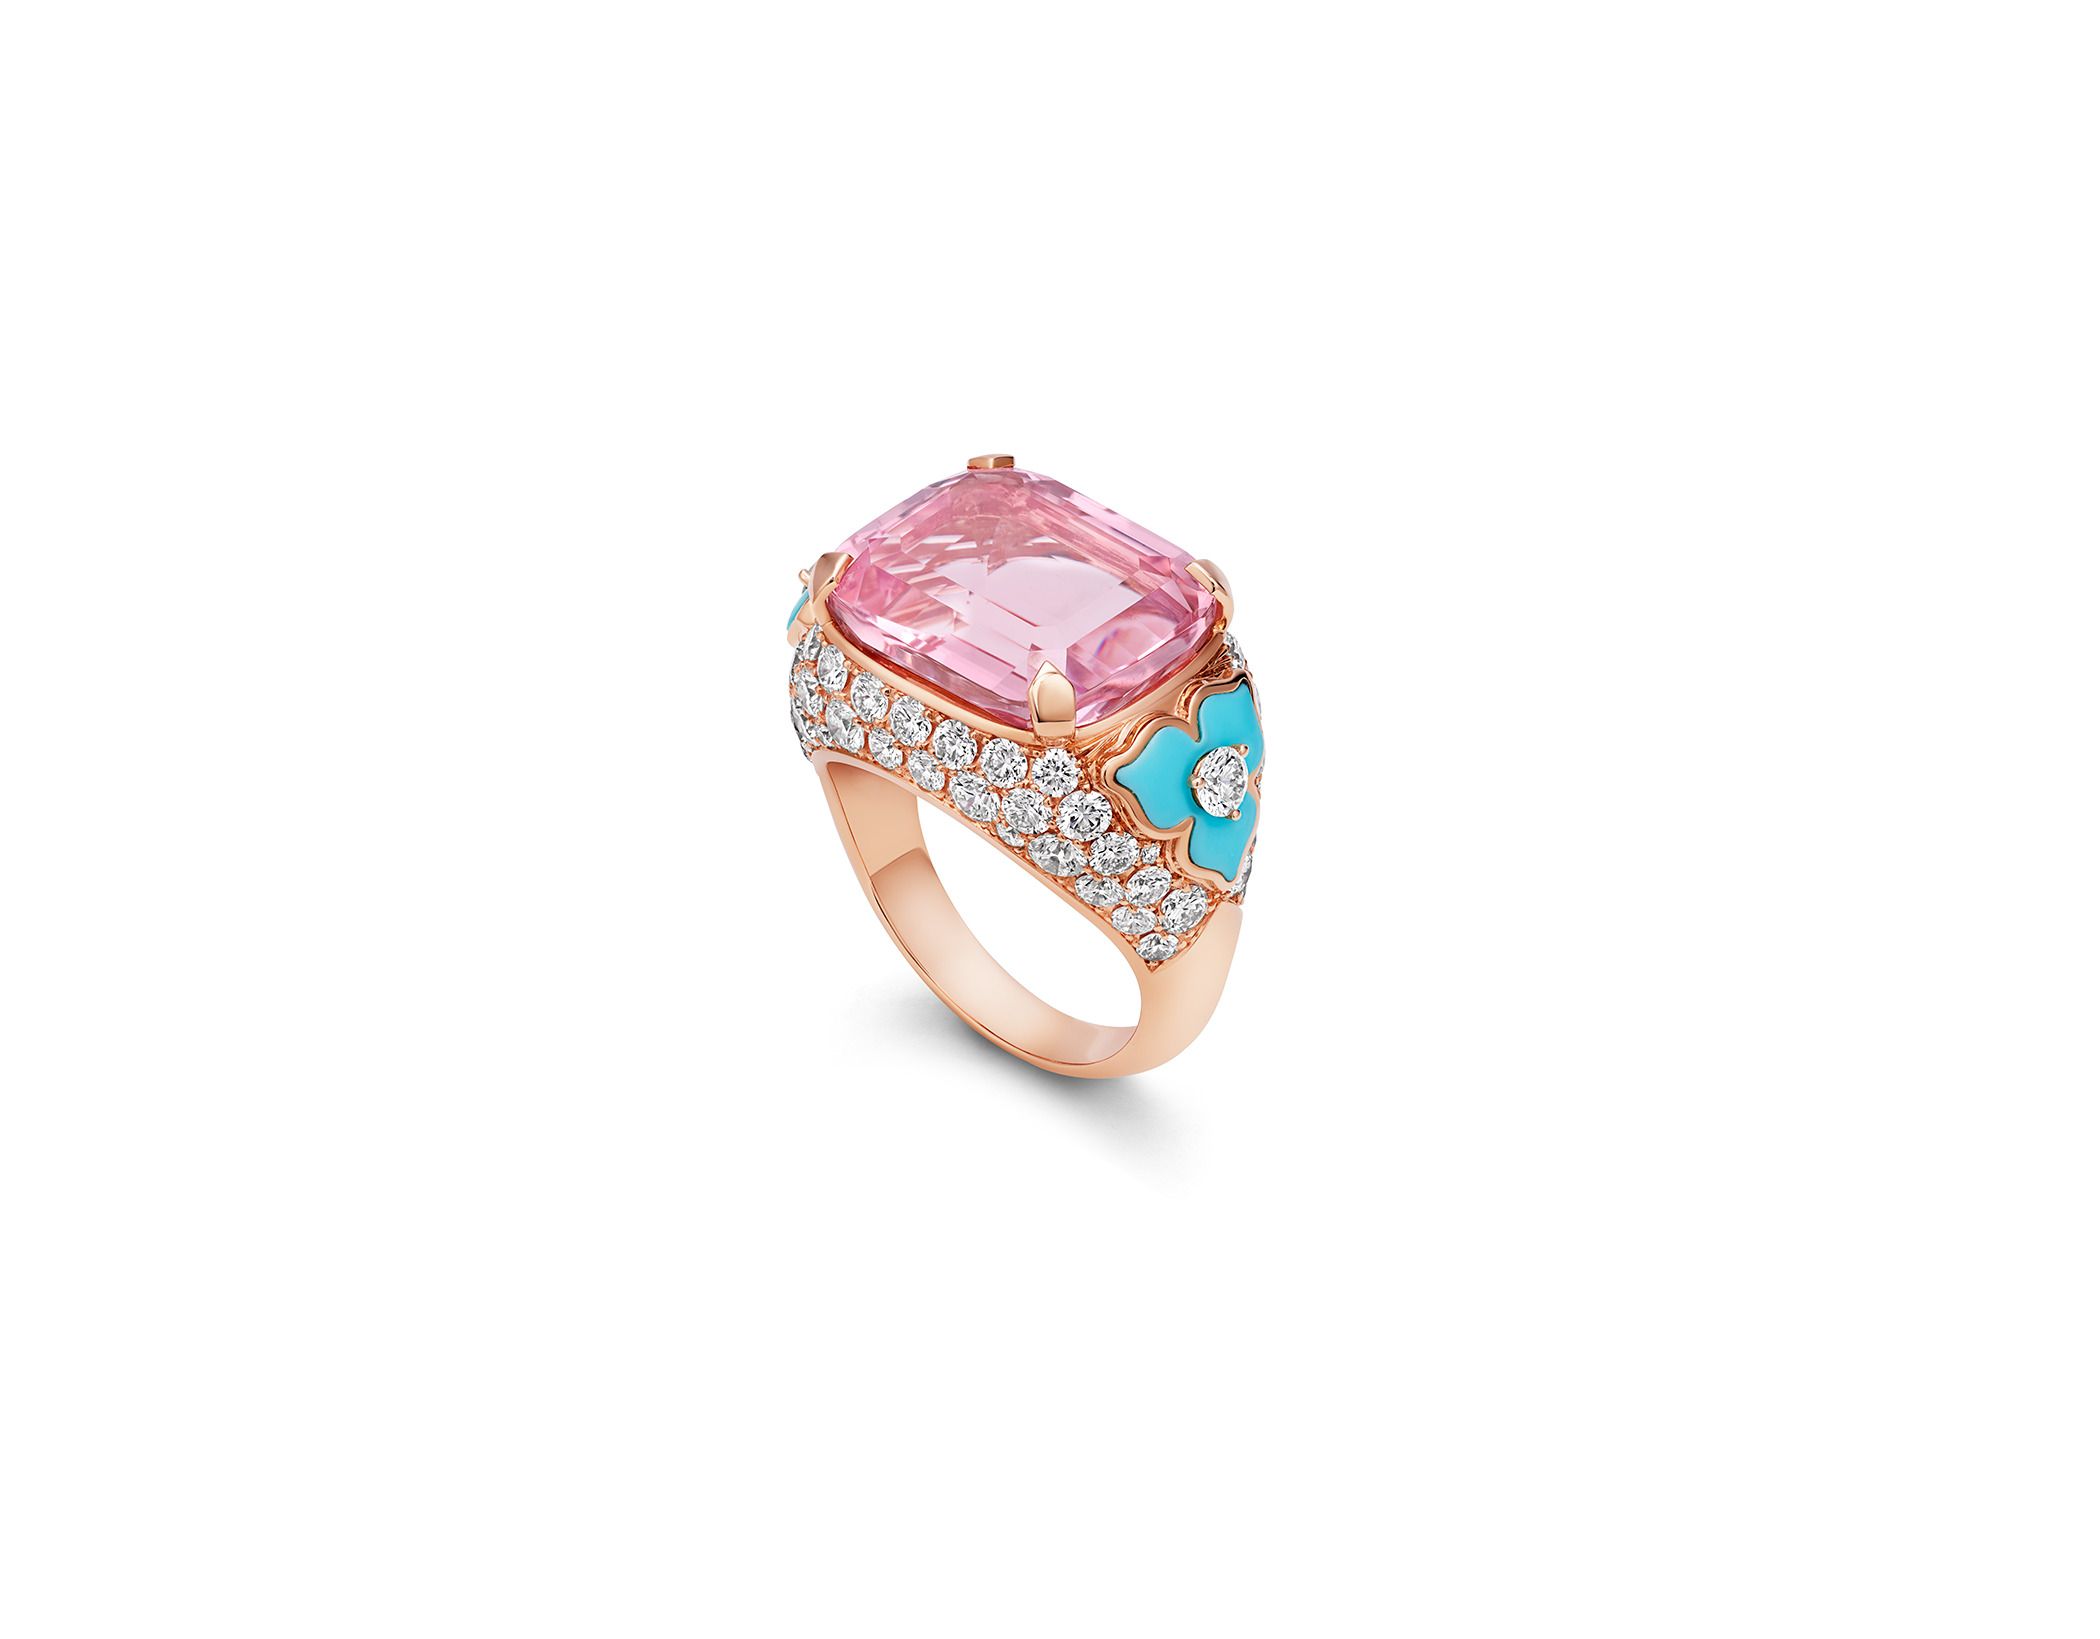 Best Cocktail Rings | Statement oversized jewelled rings